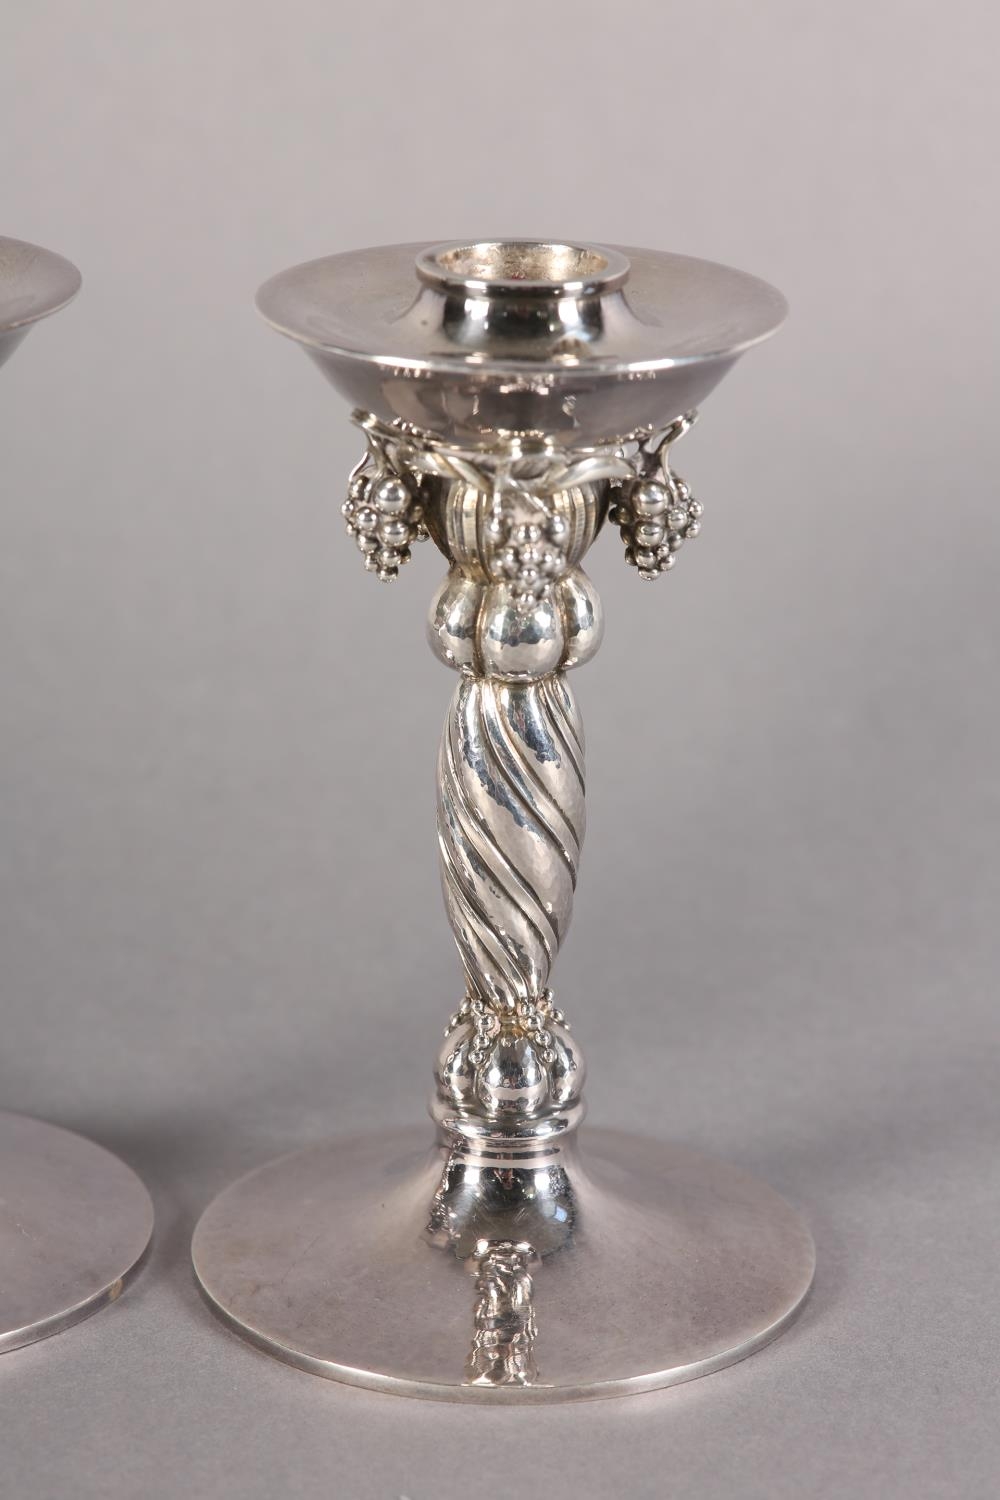 A PAIR OF GEORG JENSEN SILVER GRAPEVINE CANDLESTICKS No. 263A both signed Y10 9255 Denmark Georg - Image 3 of 8